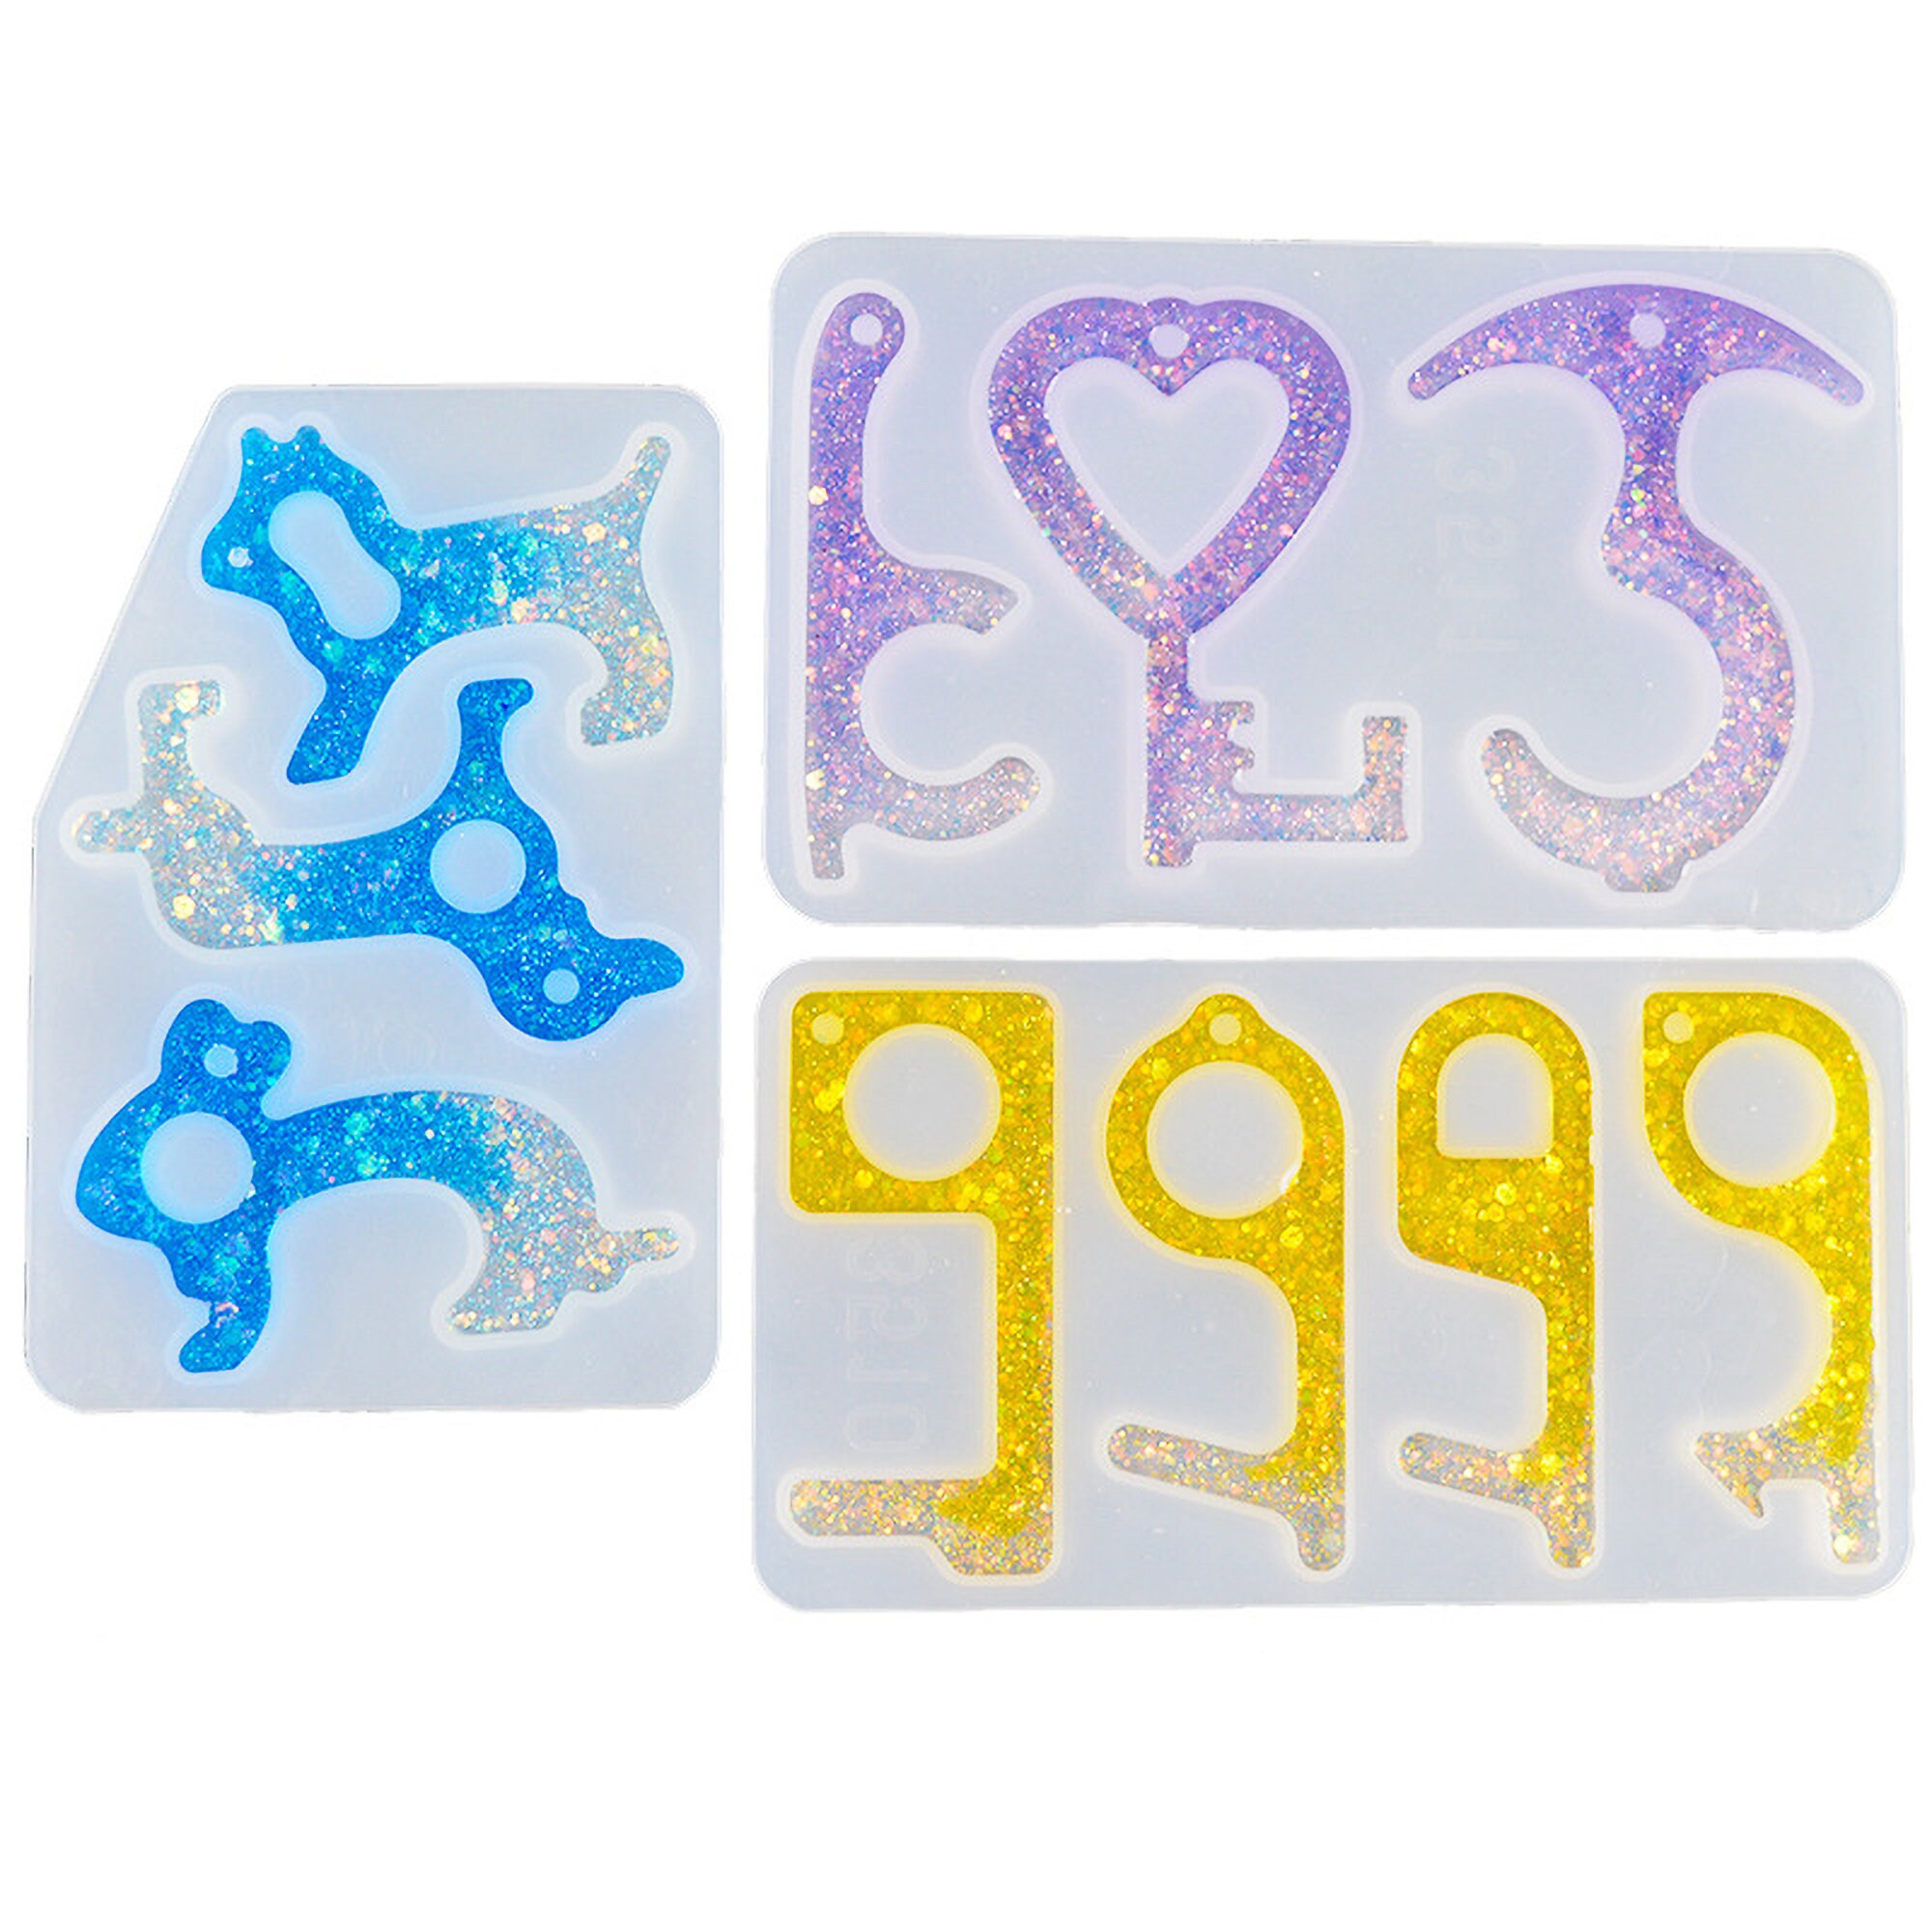 Touchless Keychain Resin Molds, Set of 5